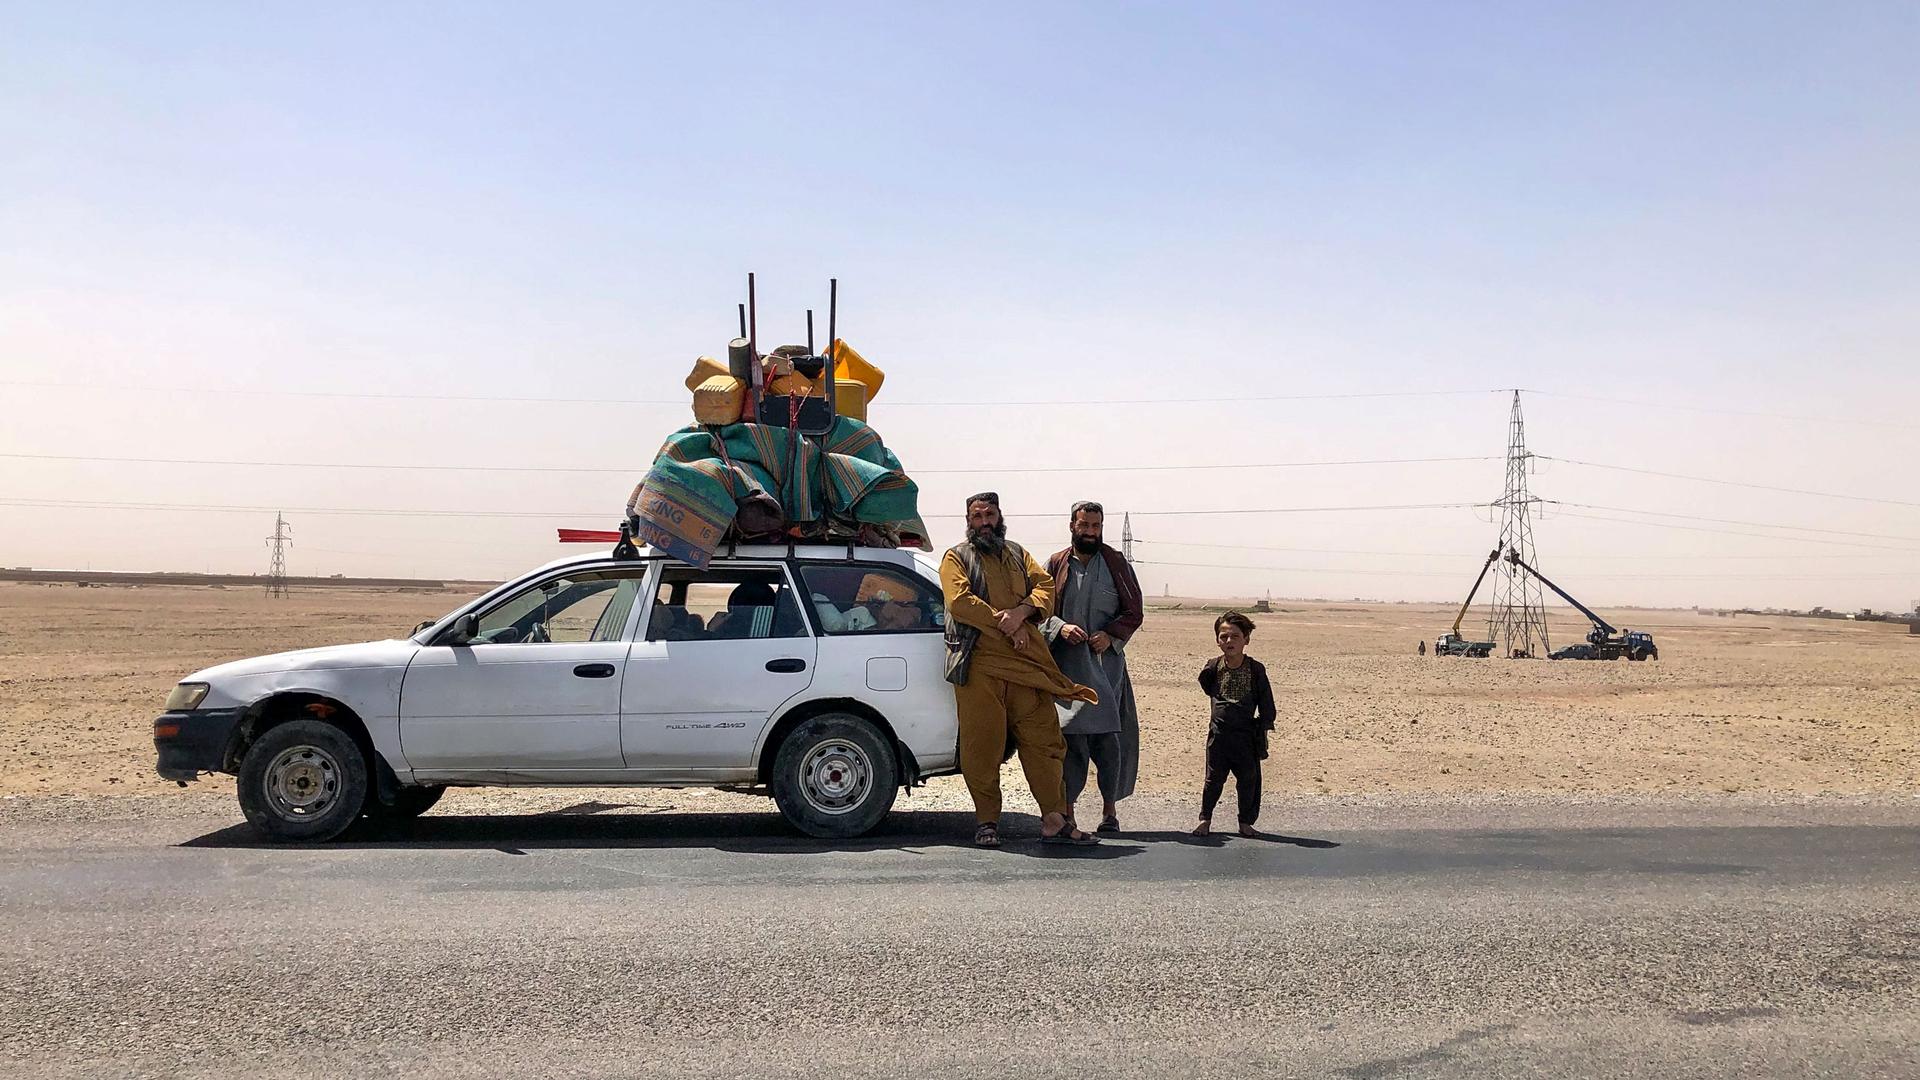 Thousands of families have been forced to leave their homes in Afghanistan over the past few months as fighting between the Taliban and Afghan security forces intensified.